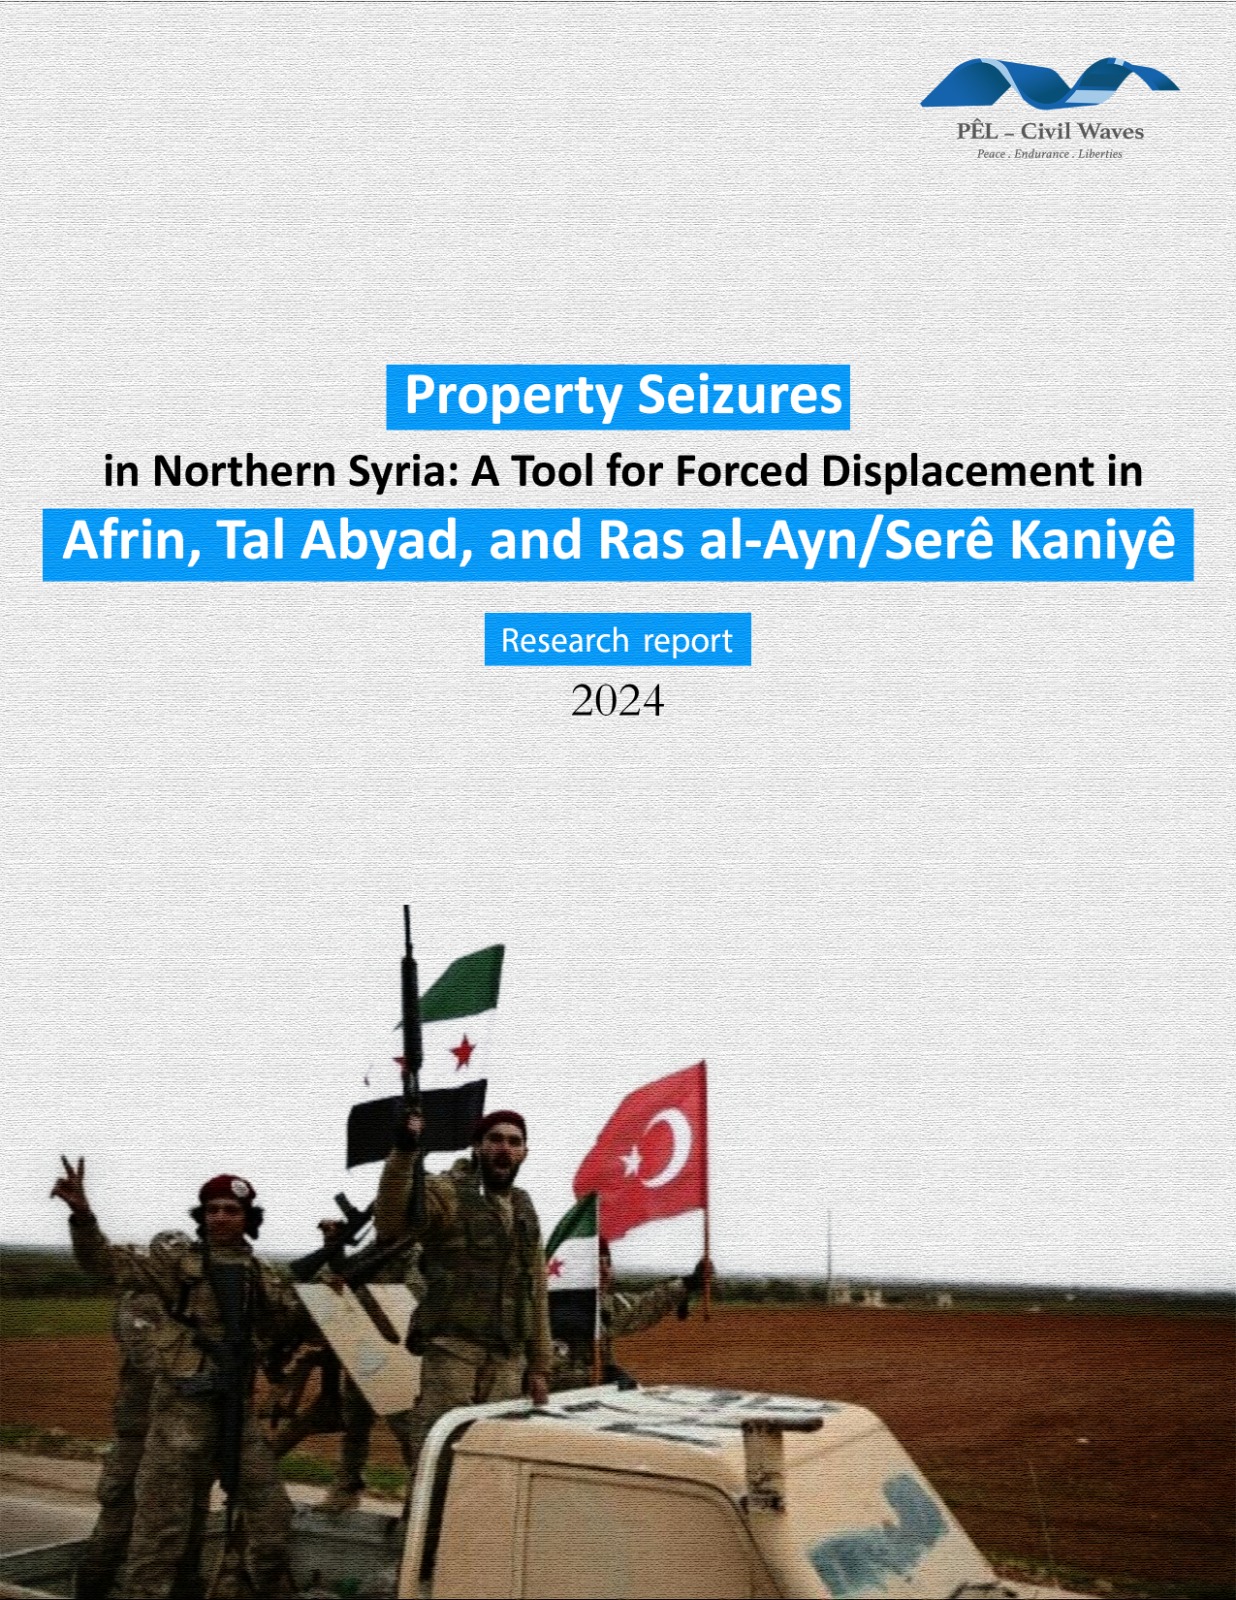 Property Seizures in Northern Syria: A Tool for Forced Displacement in Afrin, Tal Abyad, and Ras al-Ayn/Serê Kaniyê